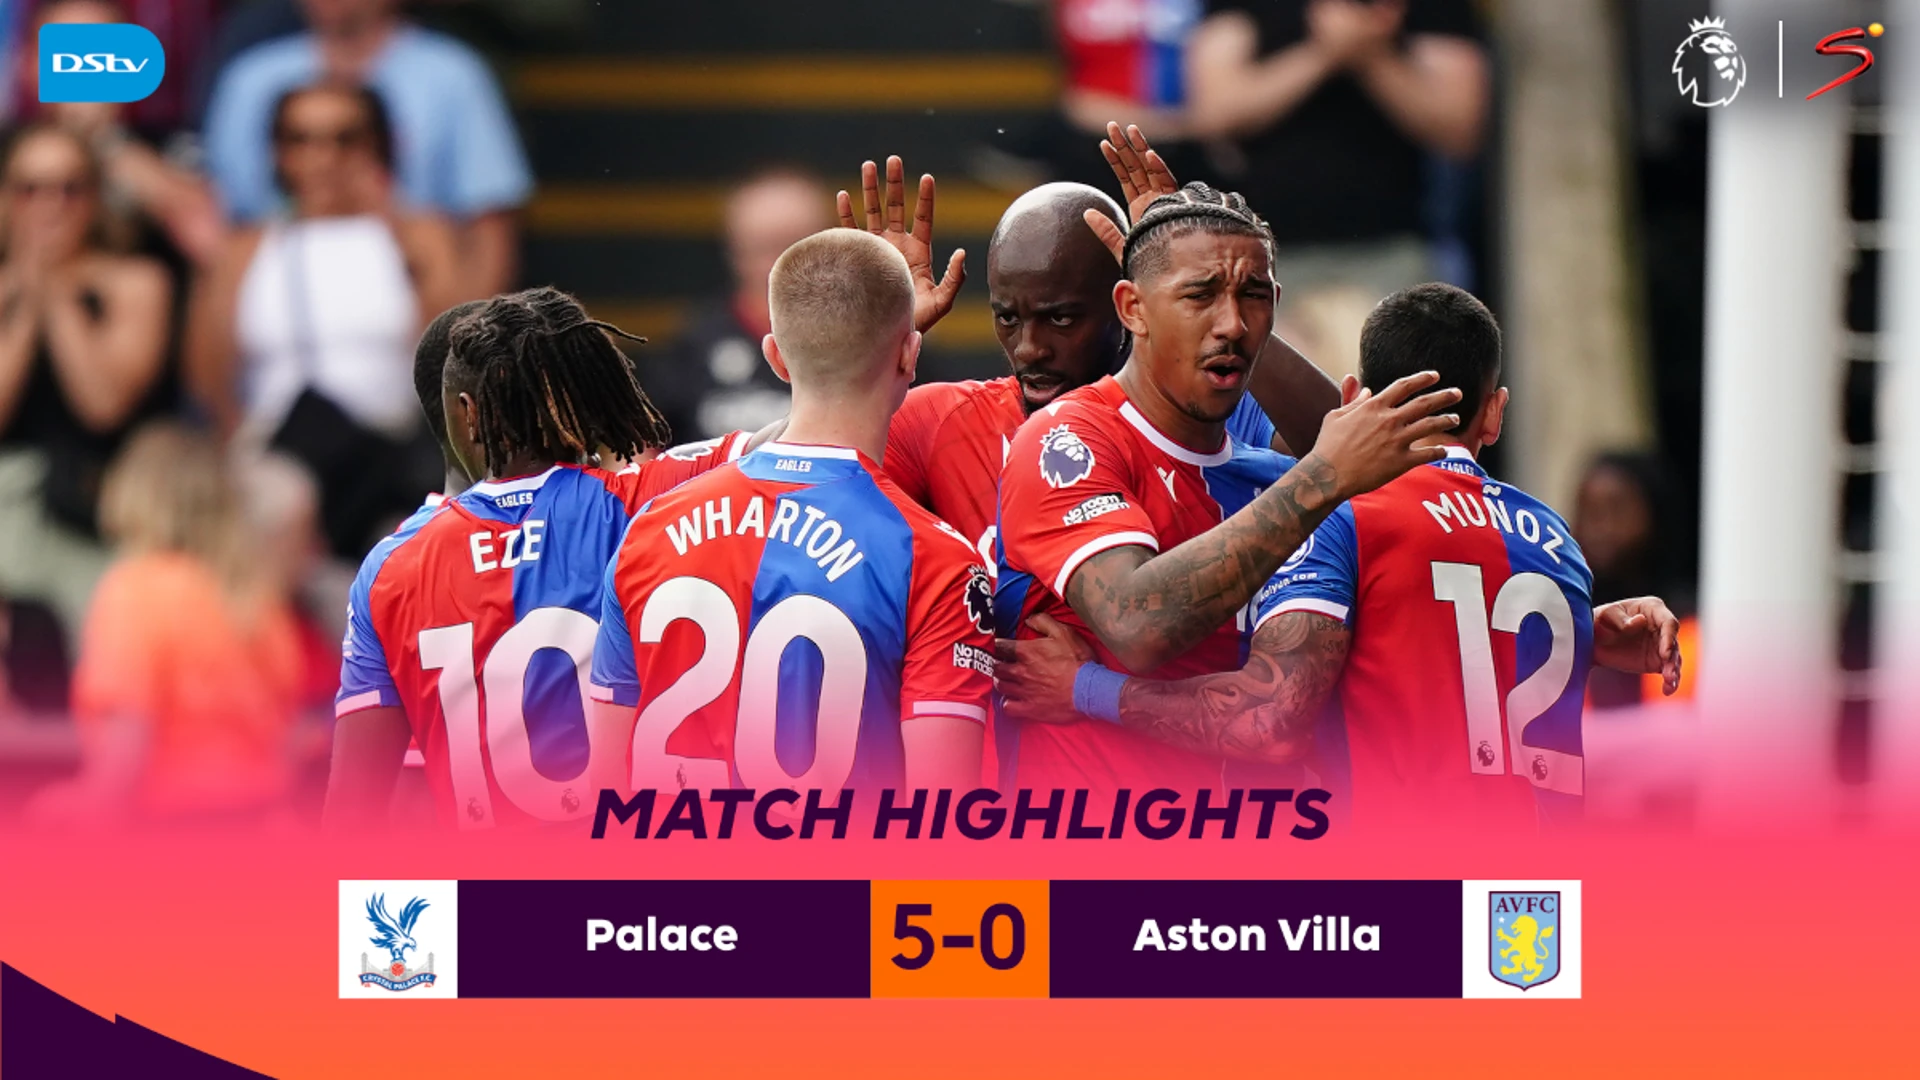 Crystal Palace v Aston Villa | Match in 3 Minutes | Premier League | Highlights